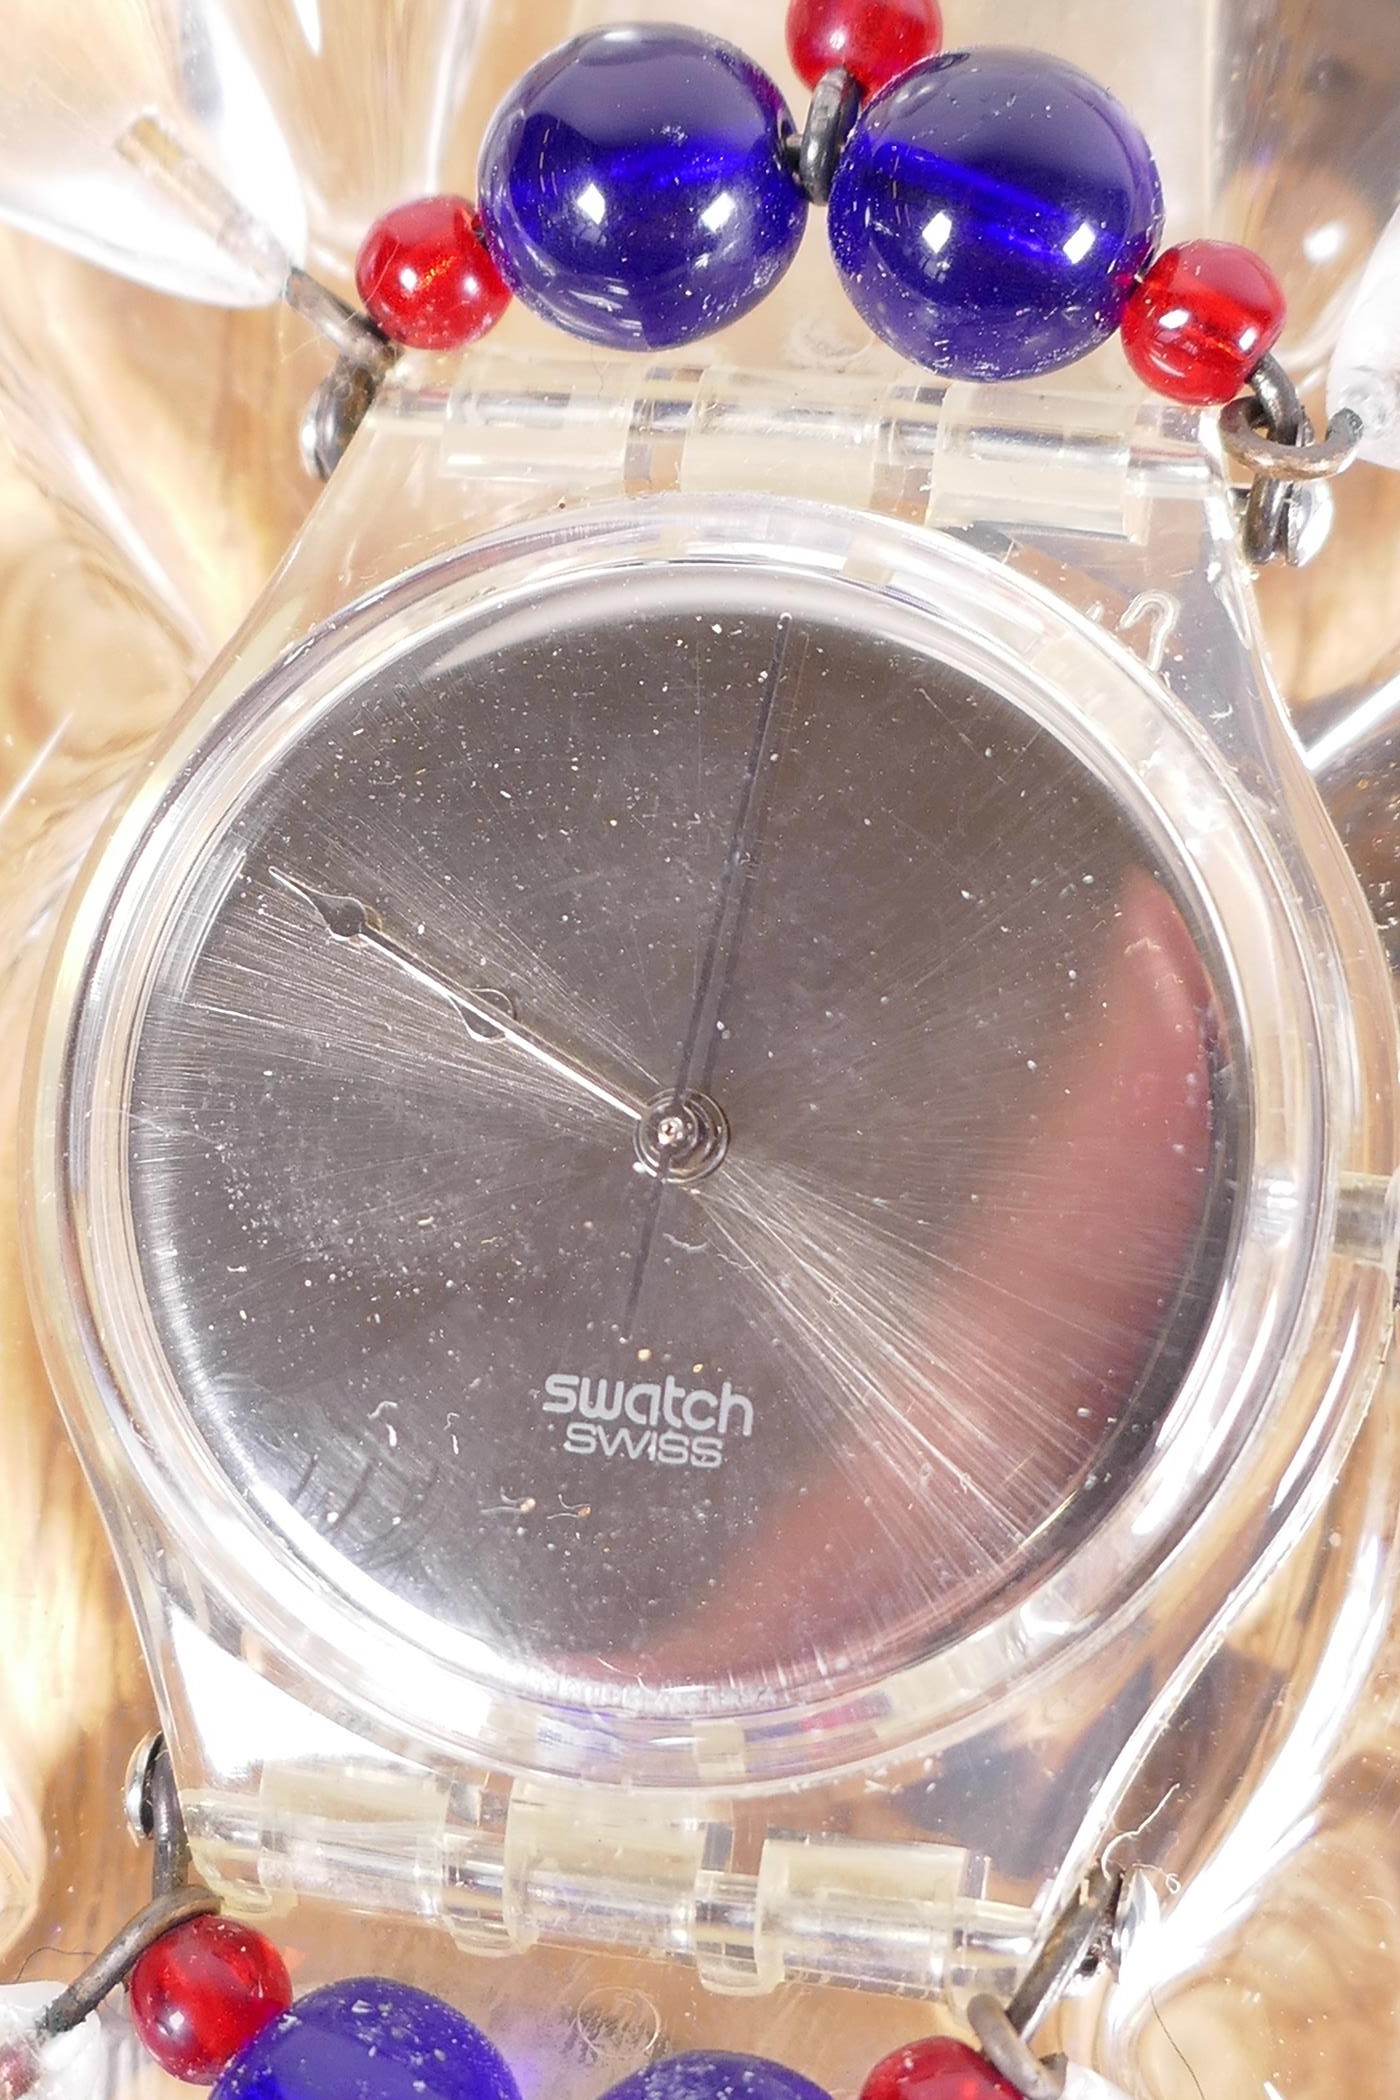 A Swatch Chandelier ladies' wristwatch with glass stand and original box - Image 4 of 5